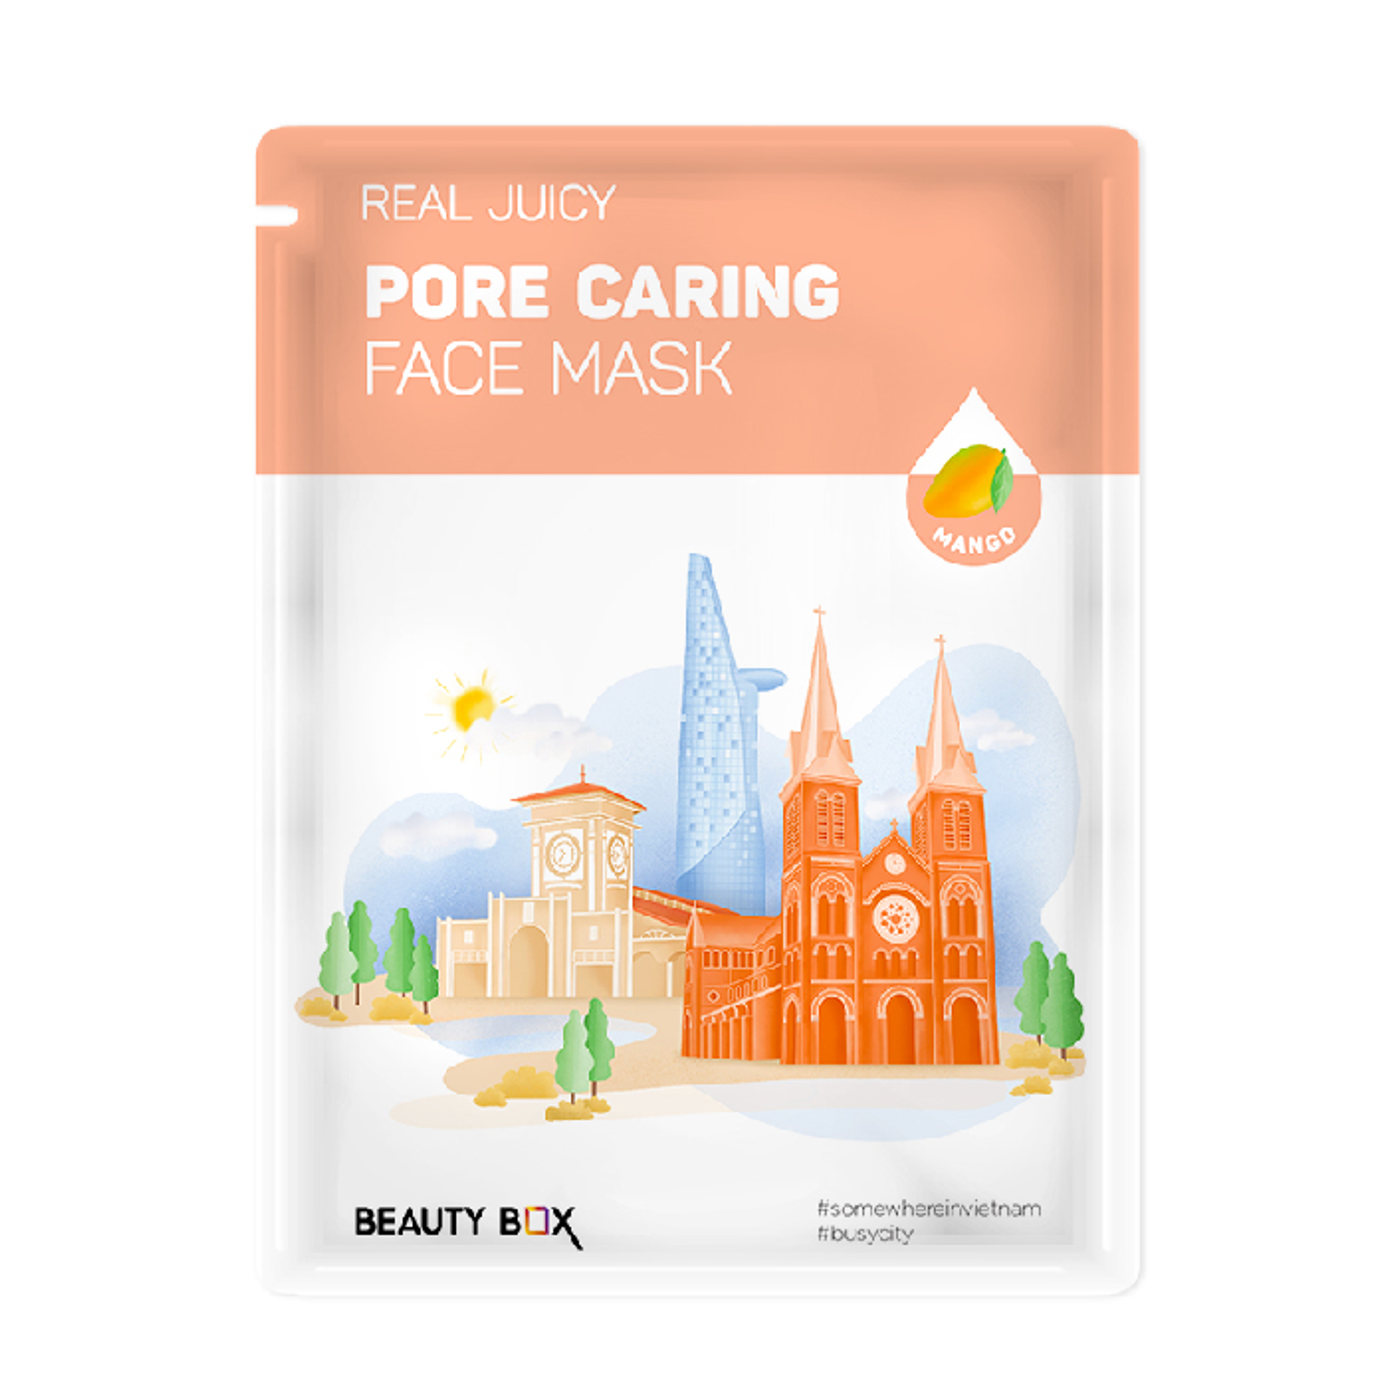 Beautybox Real Juicy Pore Caring Face Mask